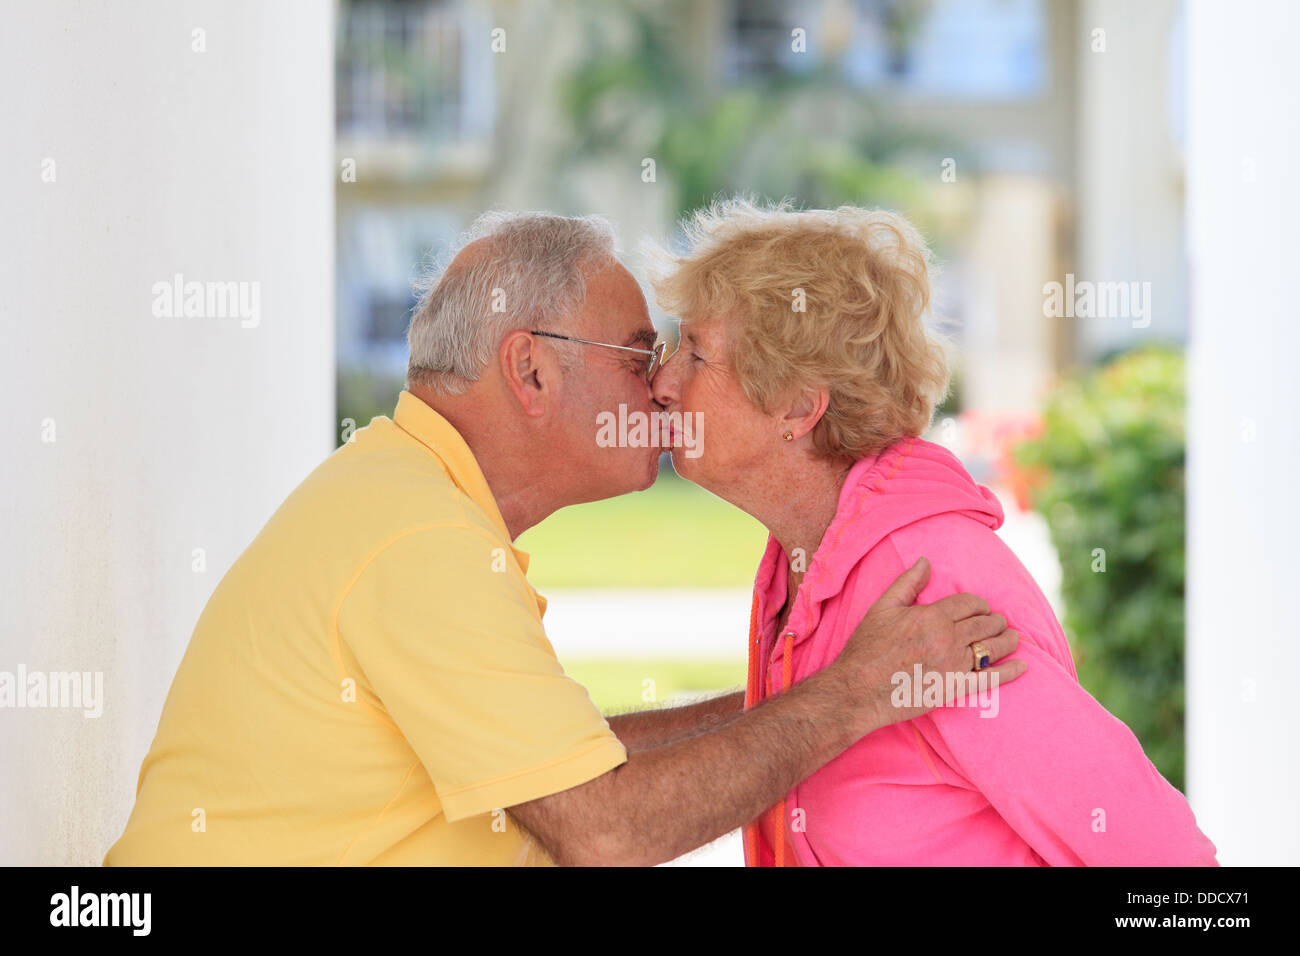 Senior couple relaxing Banque D'Images